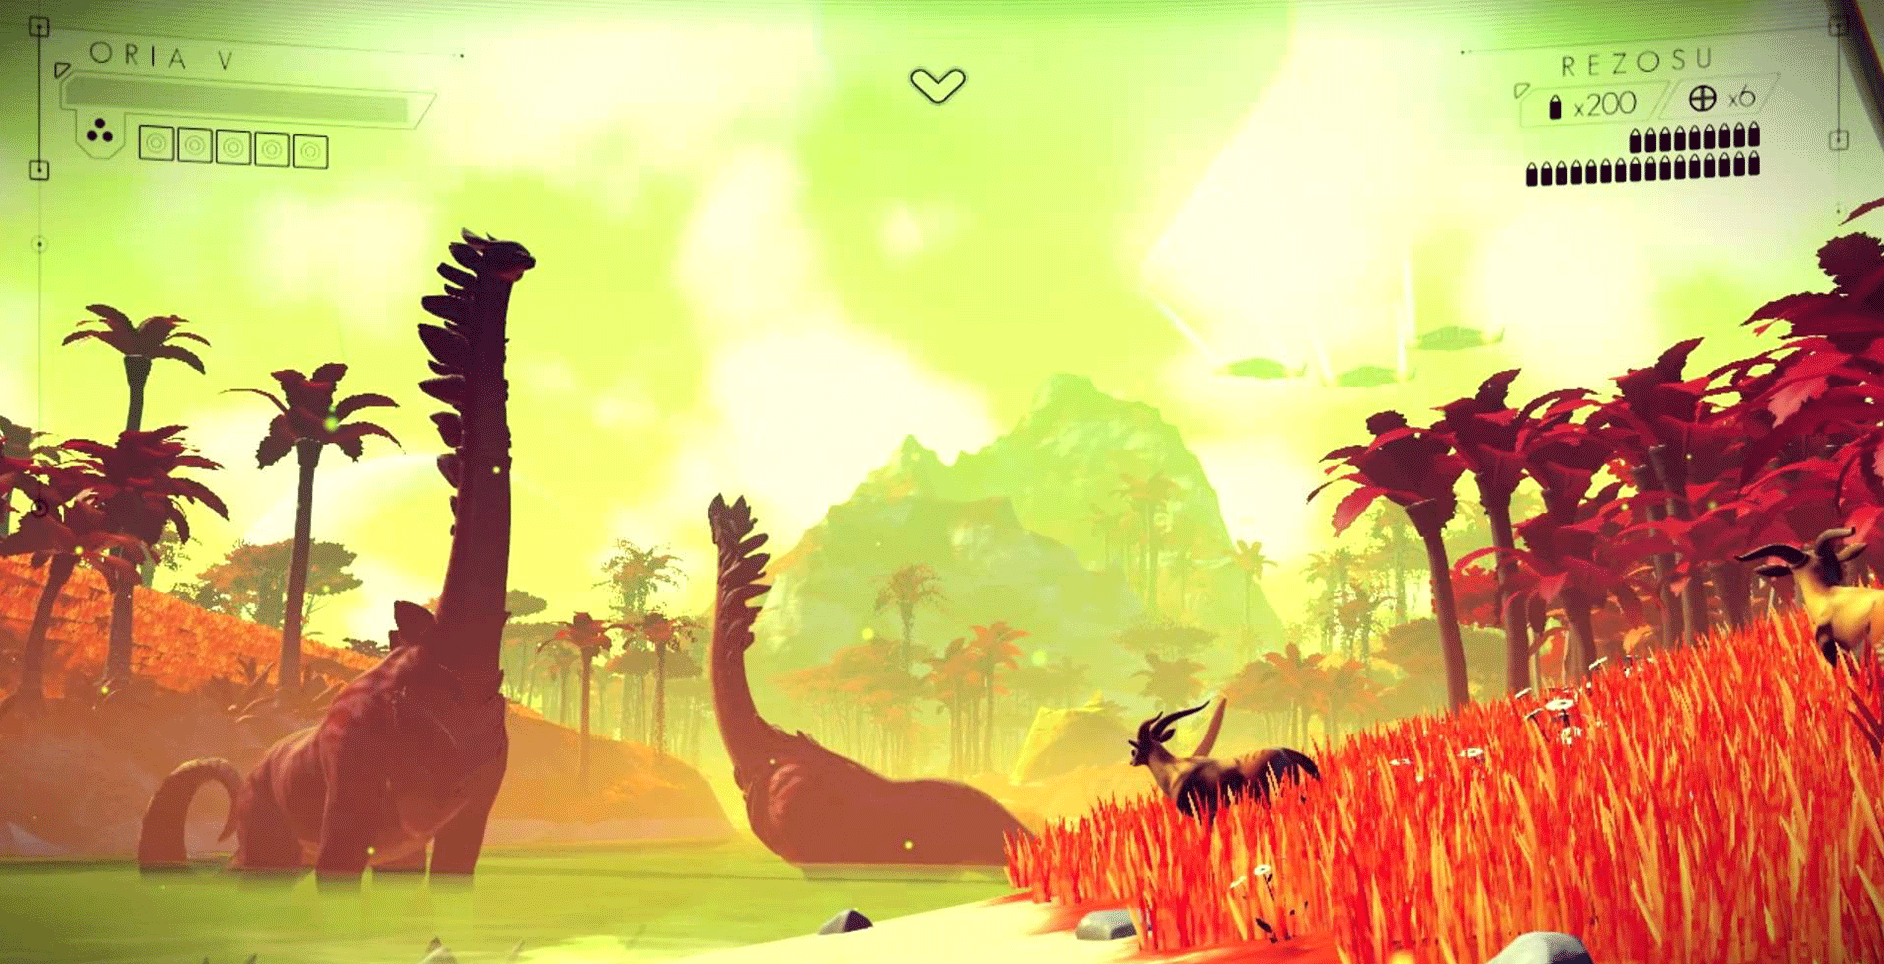 Missing Features In No Man's Sky